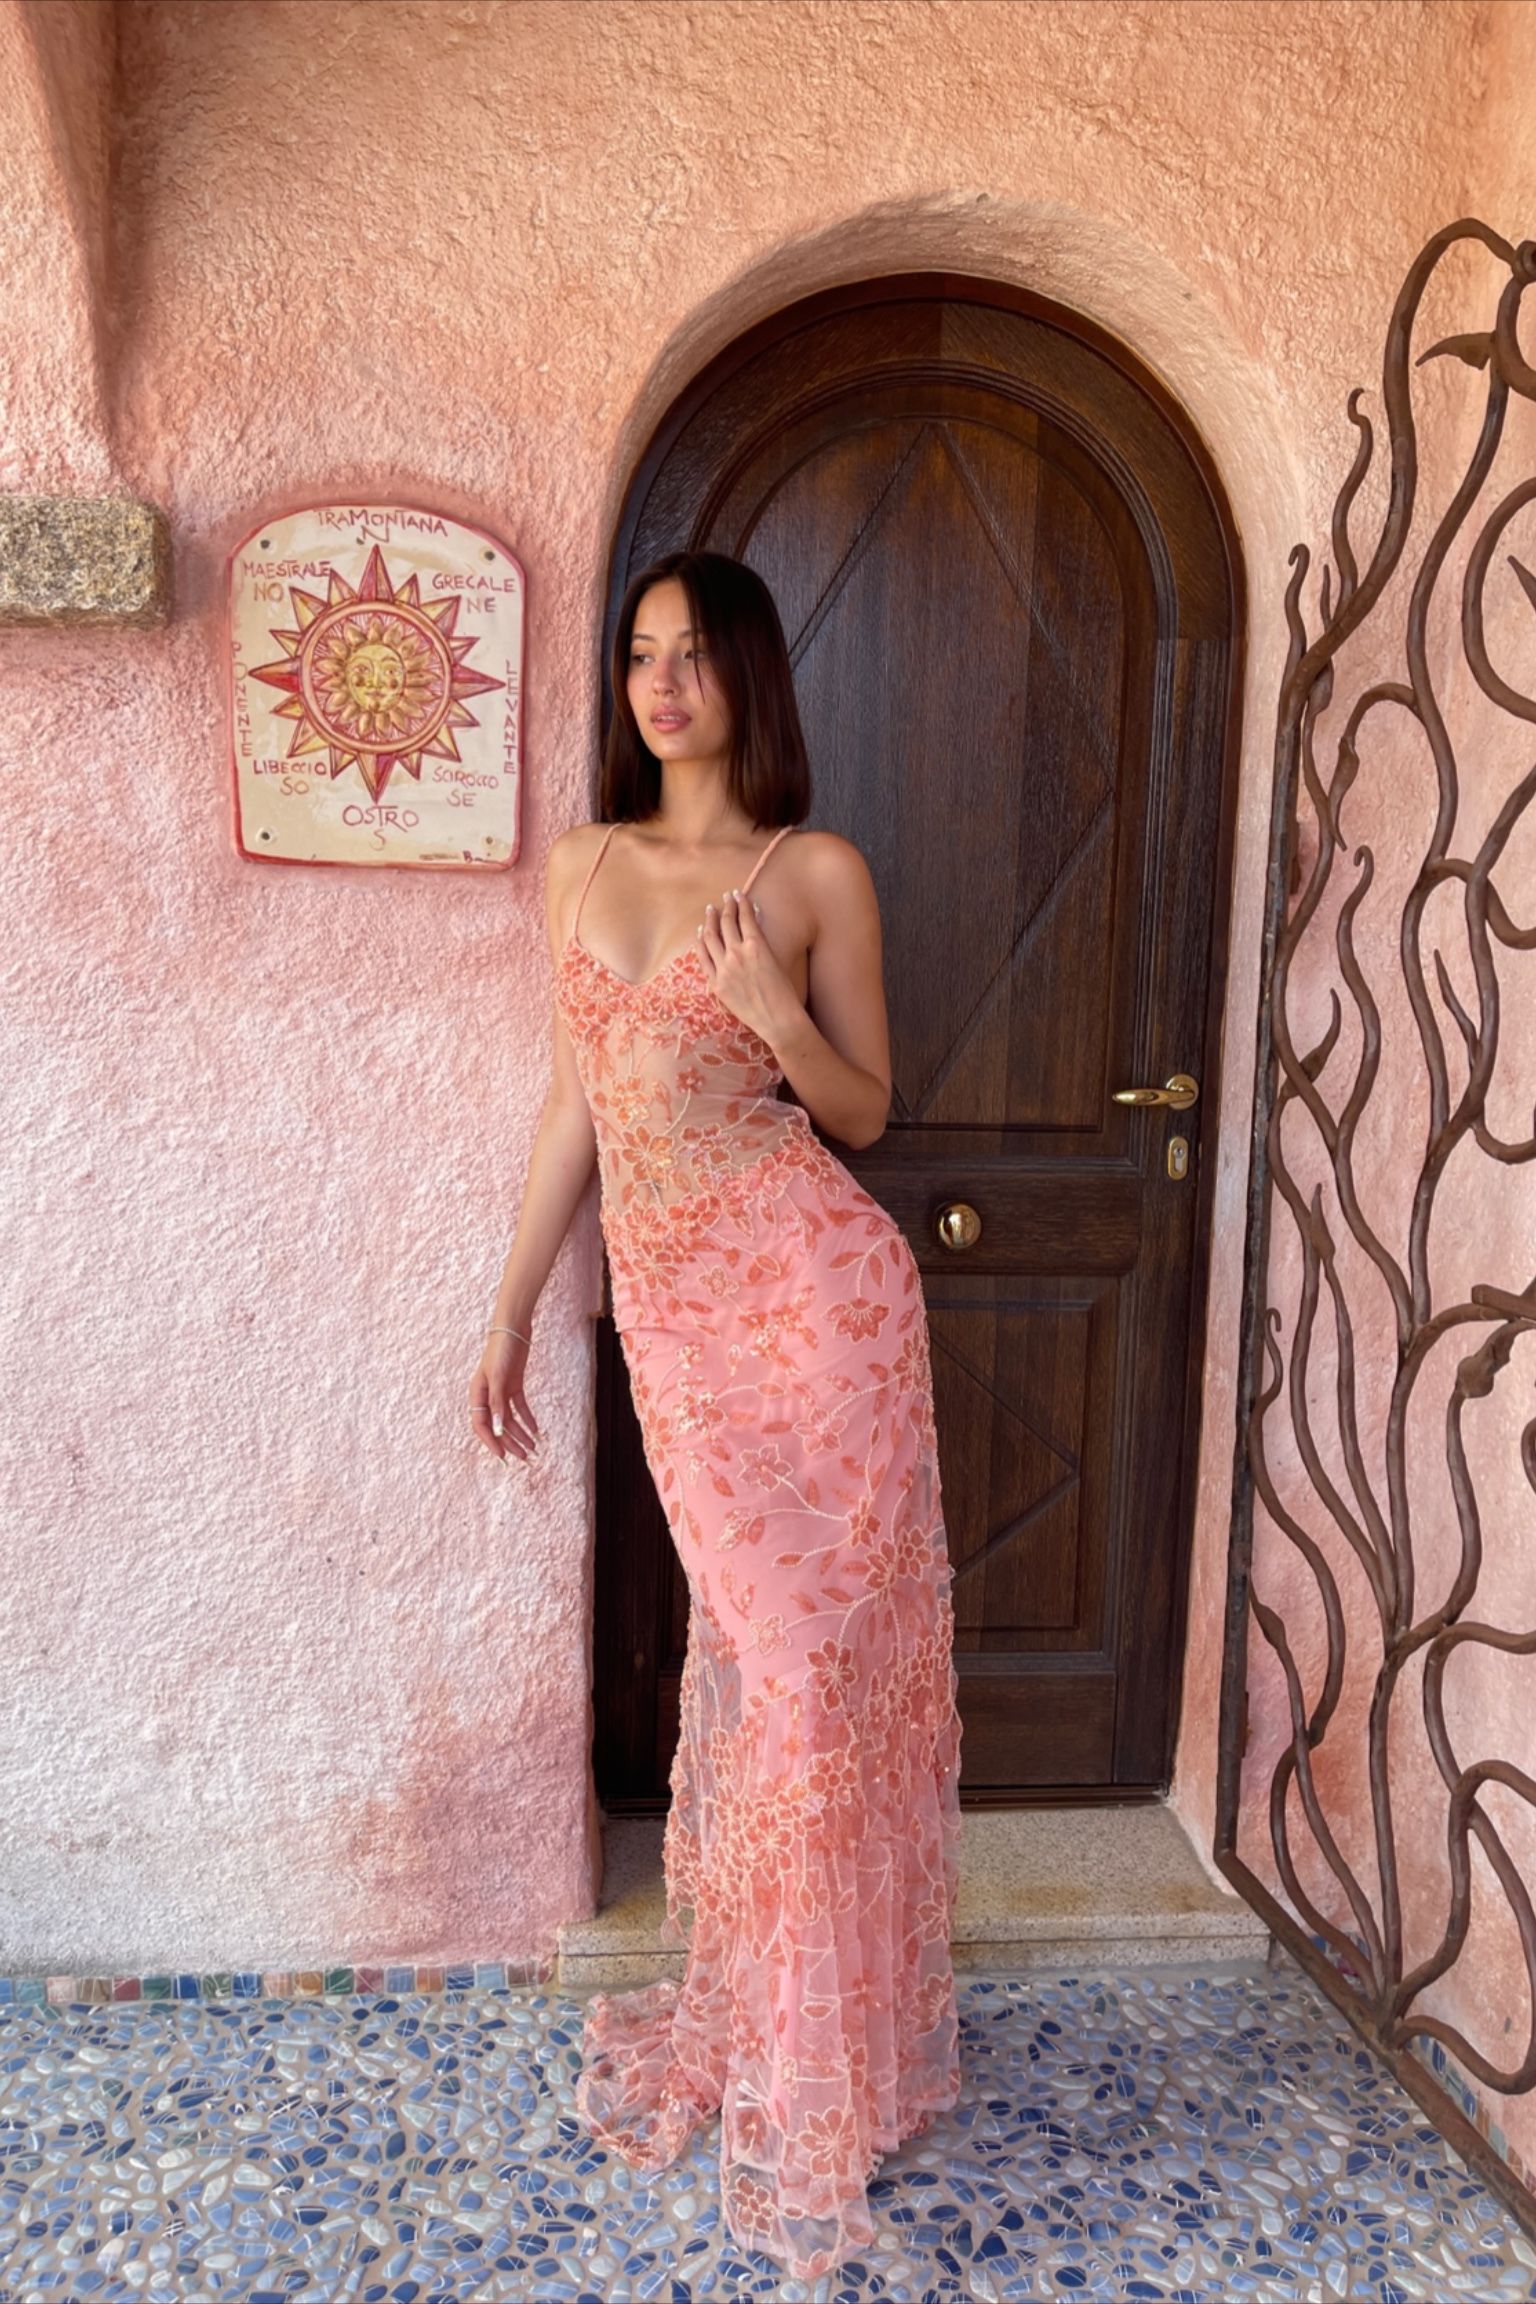 How to Wear Pink Maxi Dress: Top 13 Ladylike & Attractive Outfit Ideas